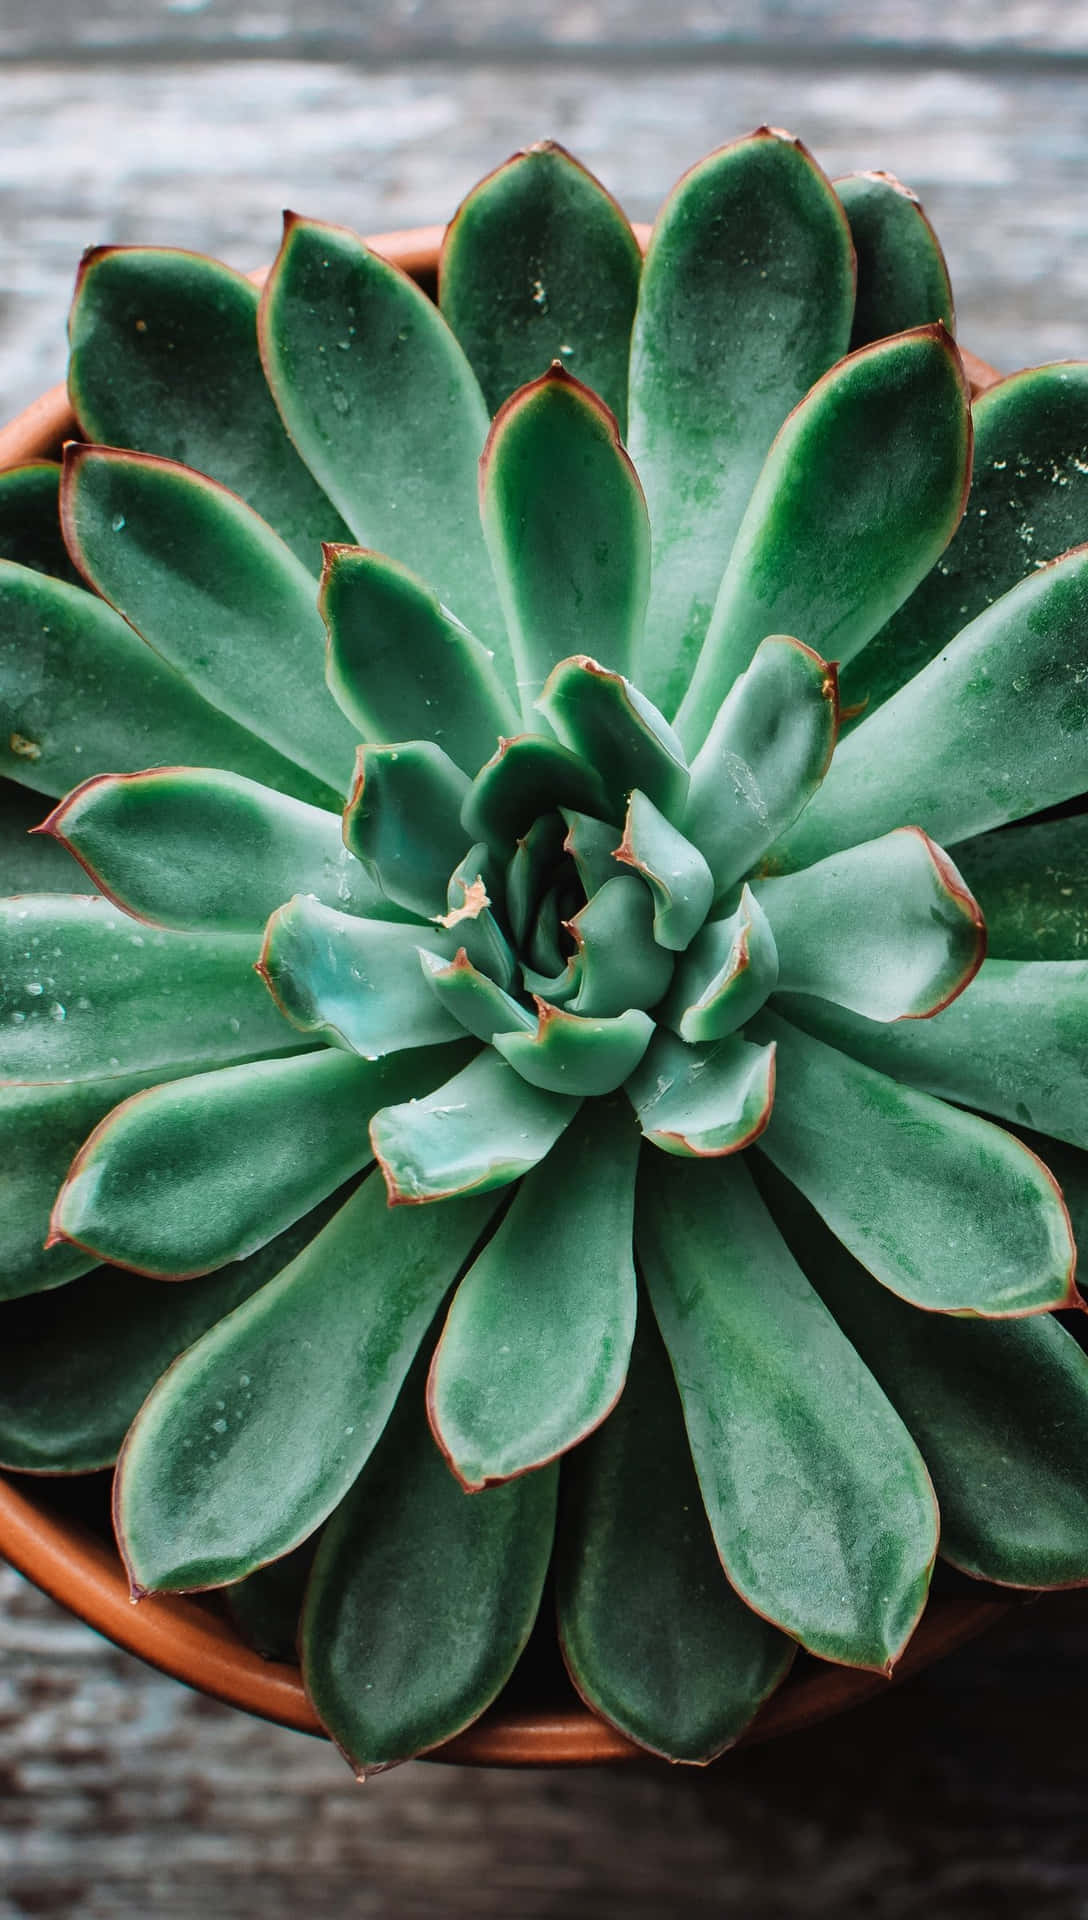 Break Up The Monotony Of Your Workday With A Vibrant Succulent Iphone Wallpaper. Wallpaper